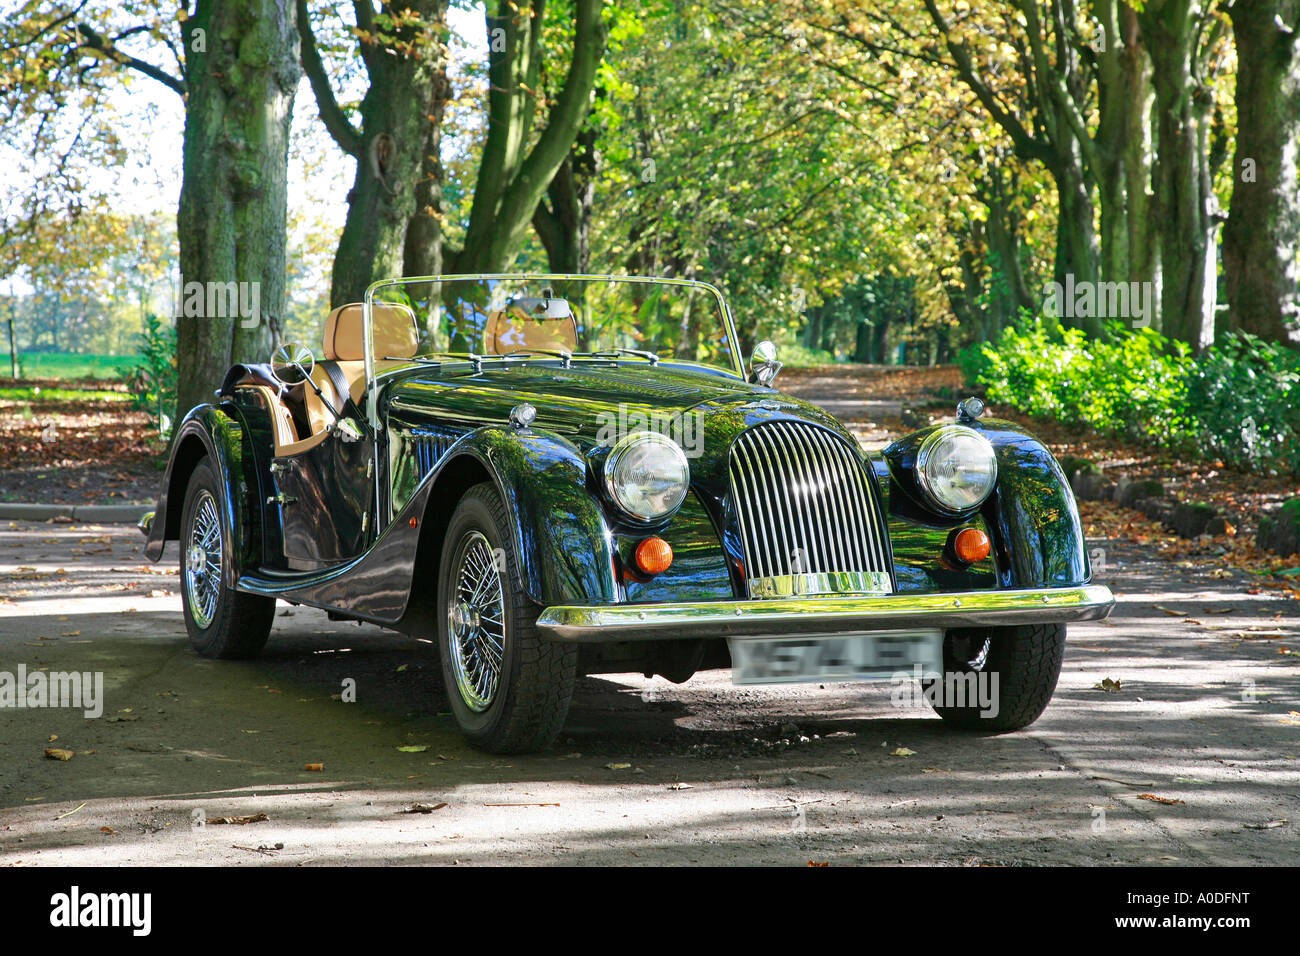 Morgan 4/4 2 seater Sports Car in a rural country setting Stock Photo